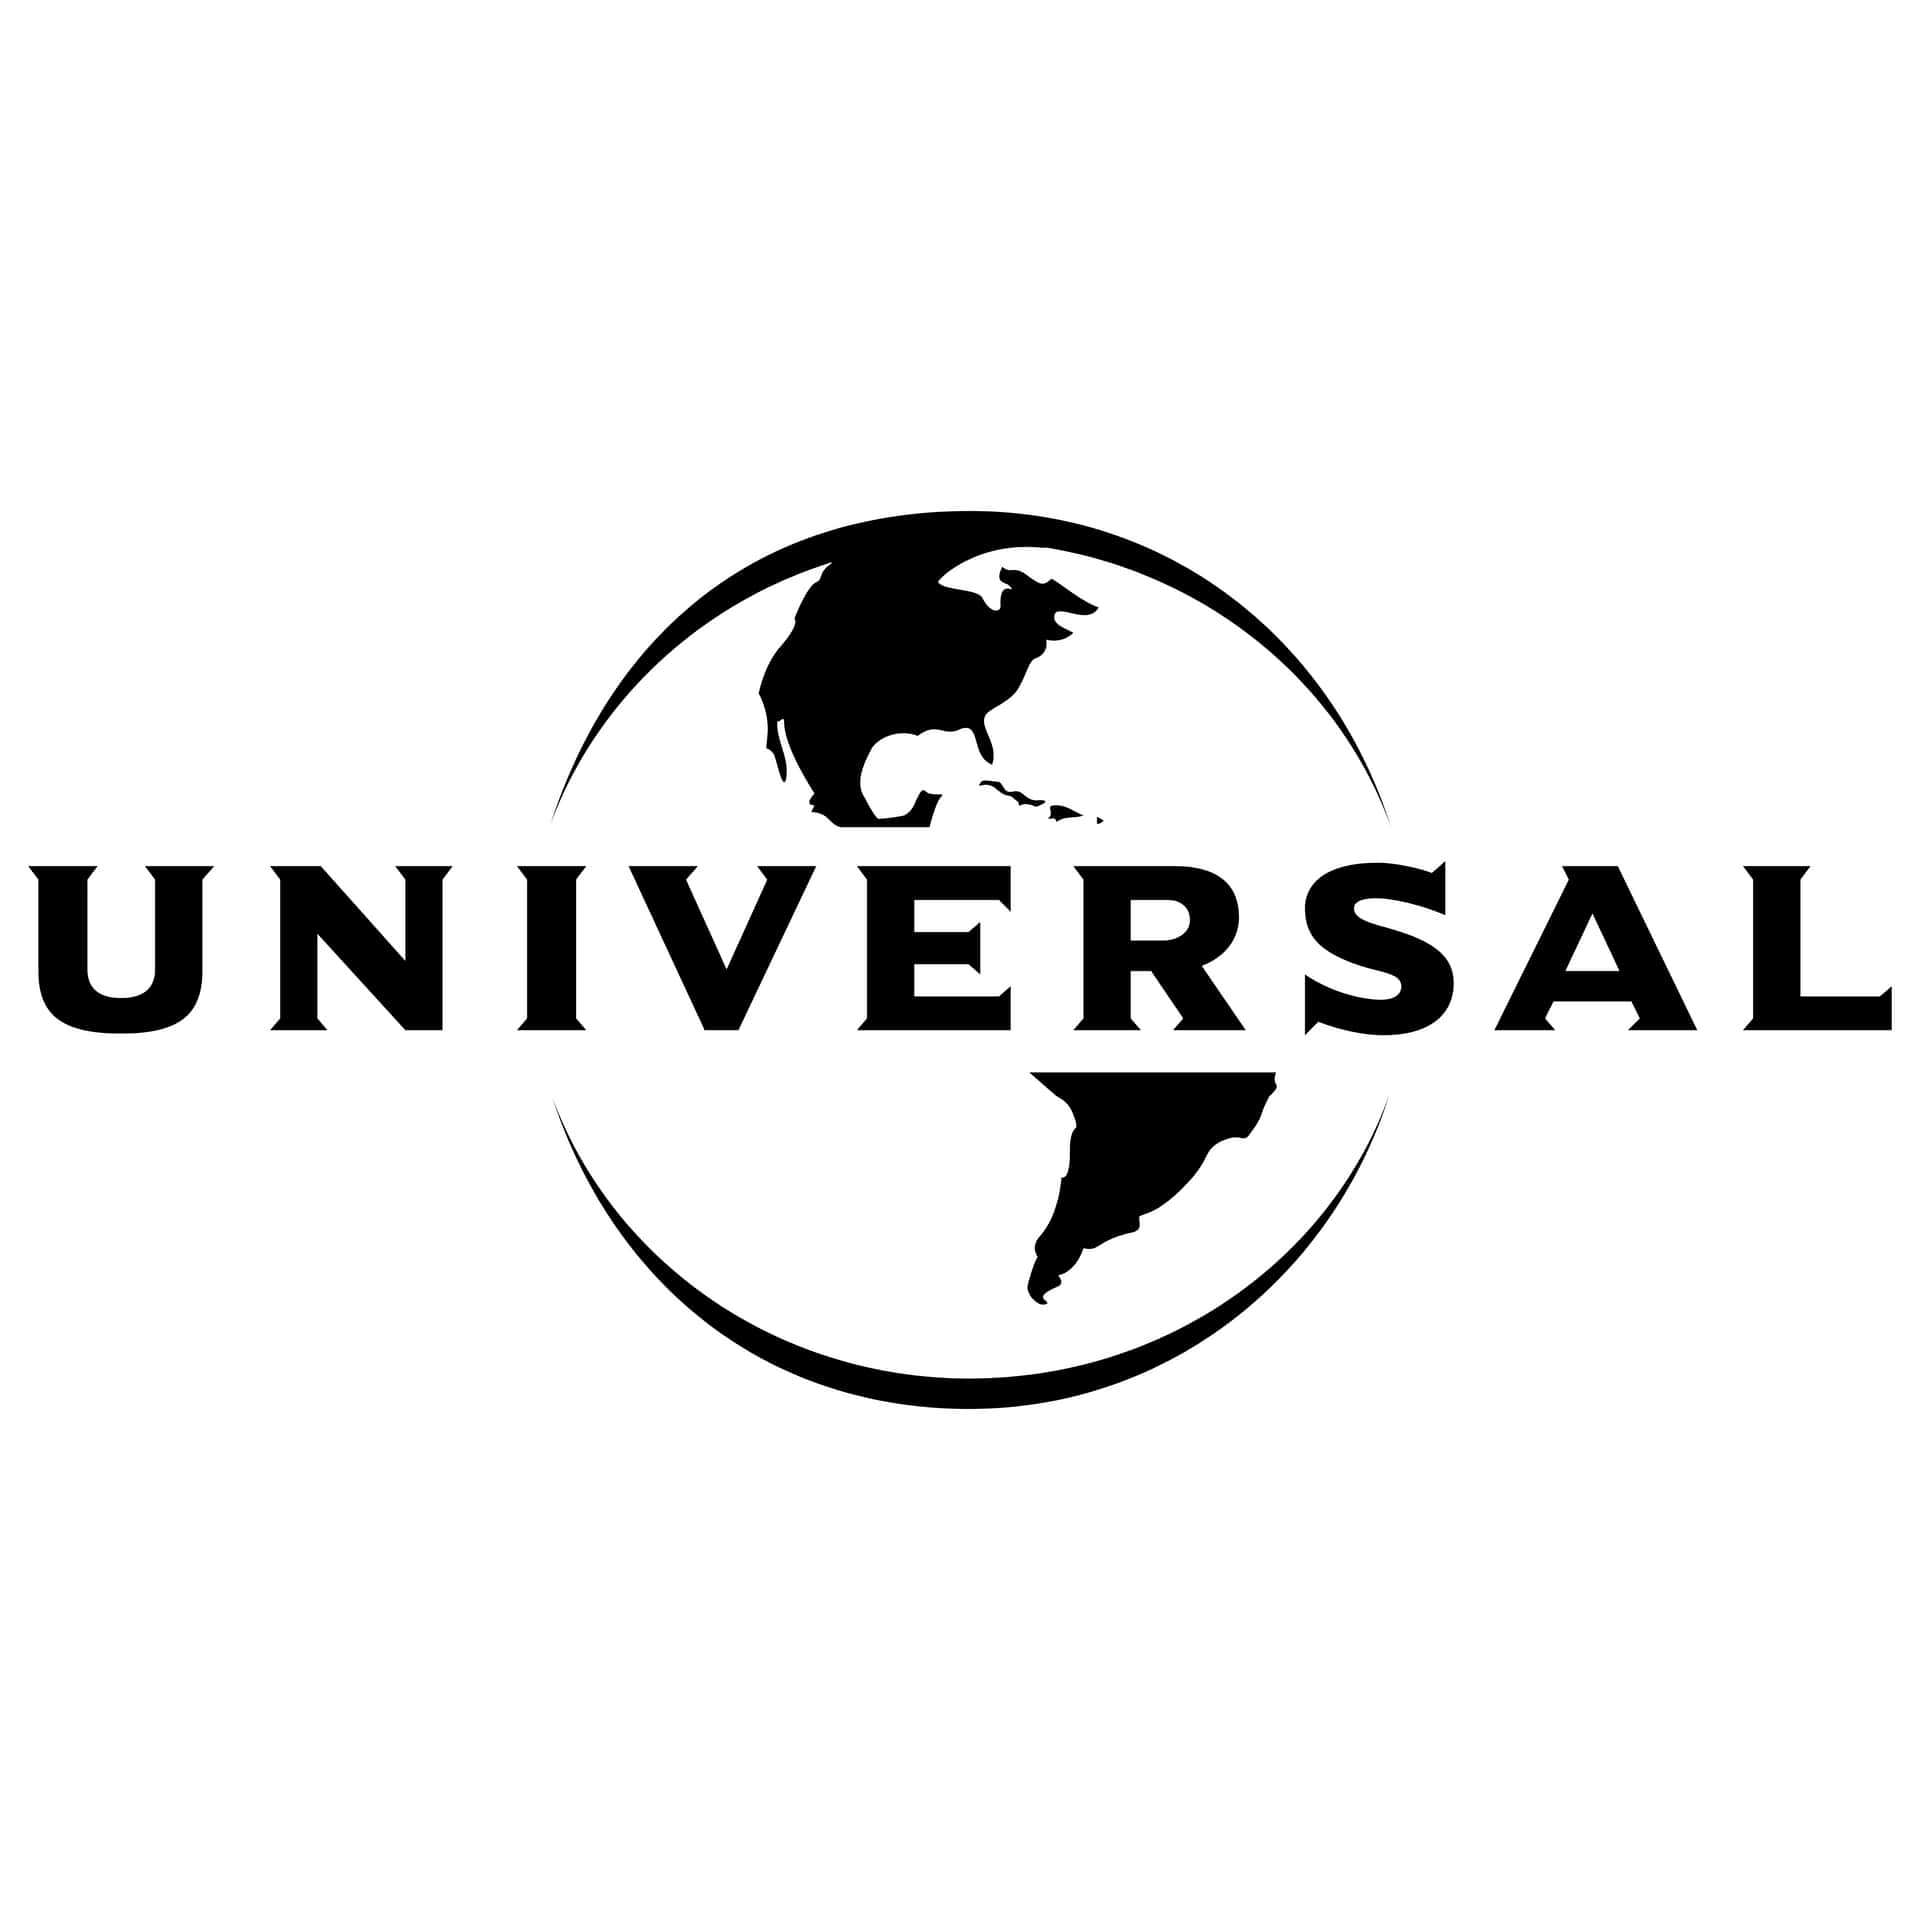 The iconic logo of Universal Pictures under a radiant blue sky.